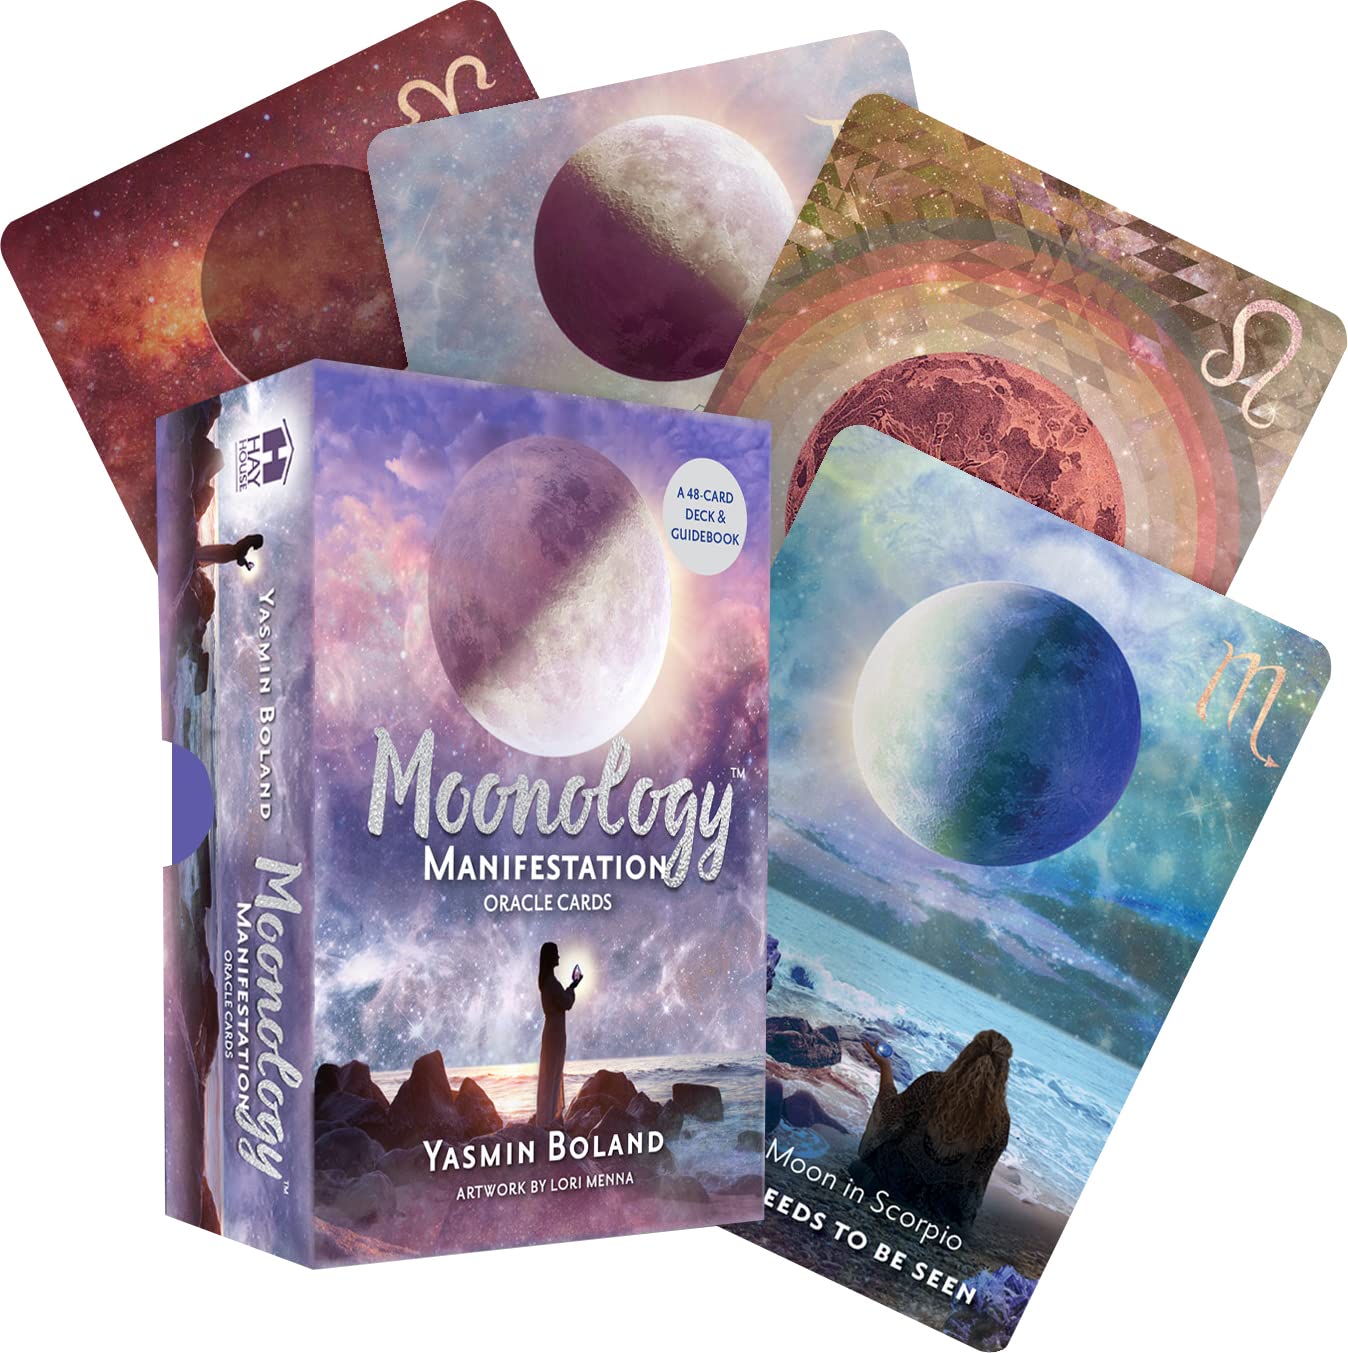 Moonology™ Manifestation Oracle: A 48-Card Deck and Guidebook | Yasmin Boland